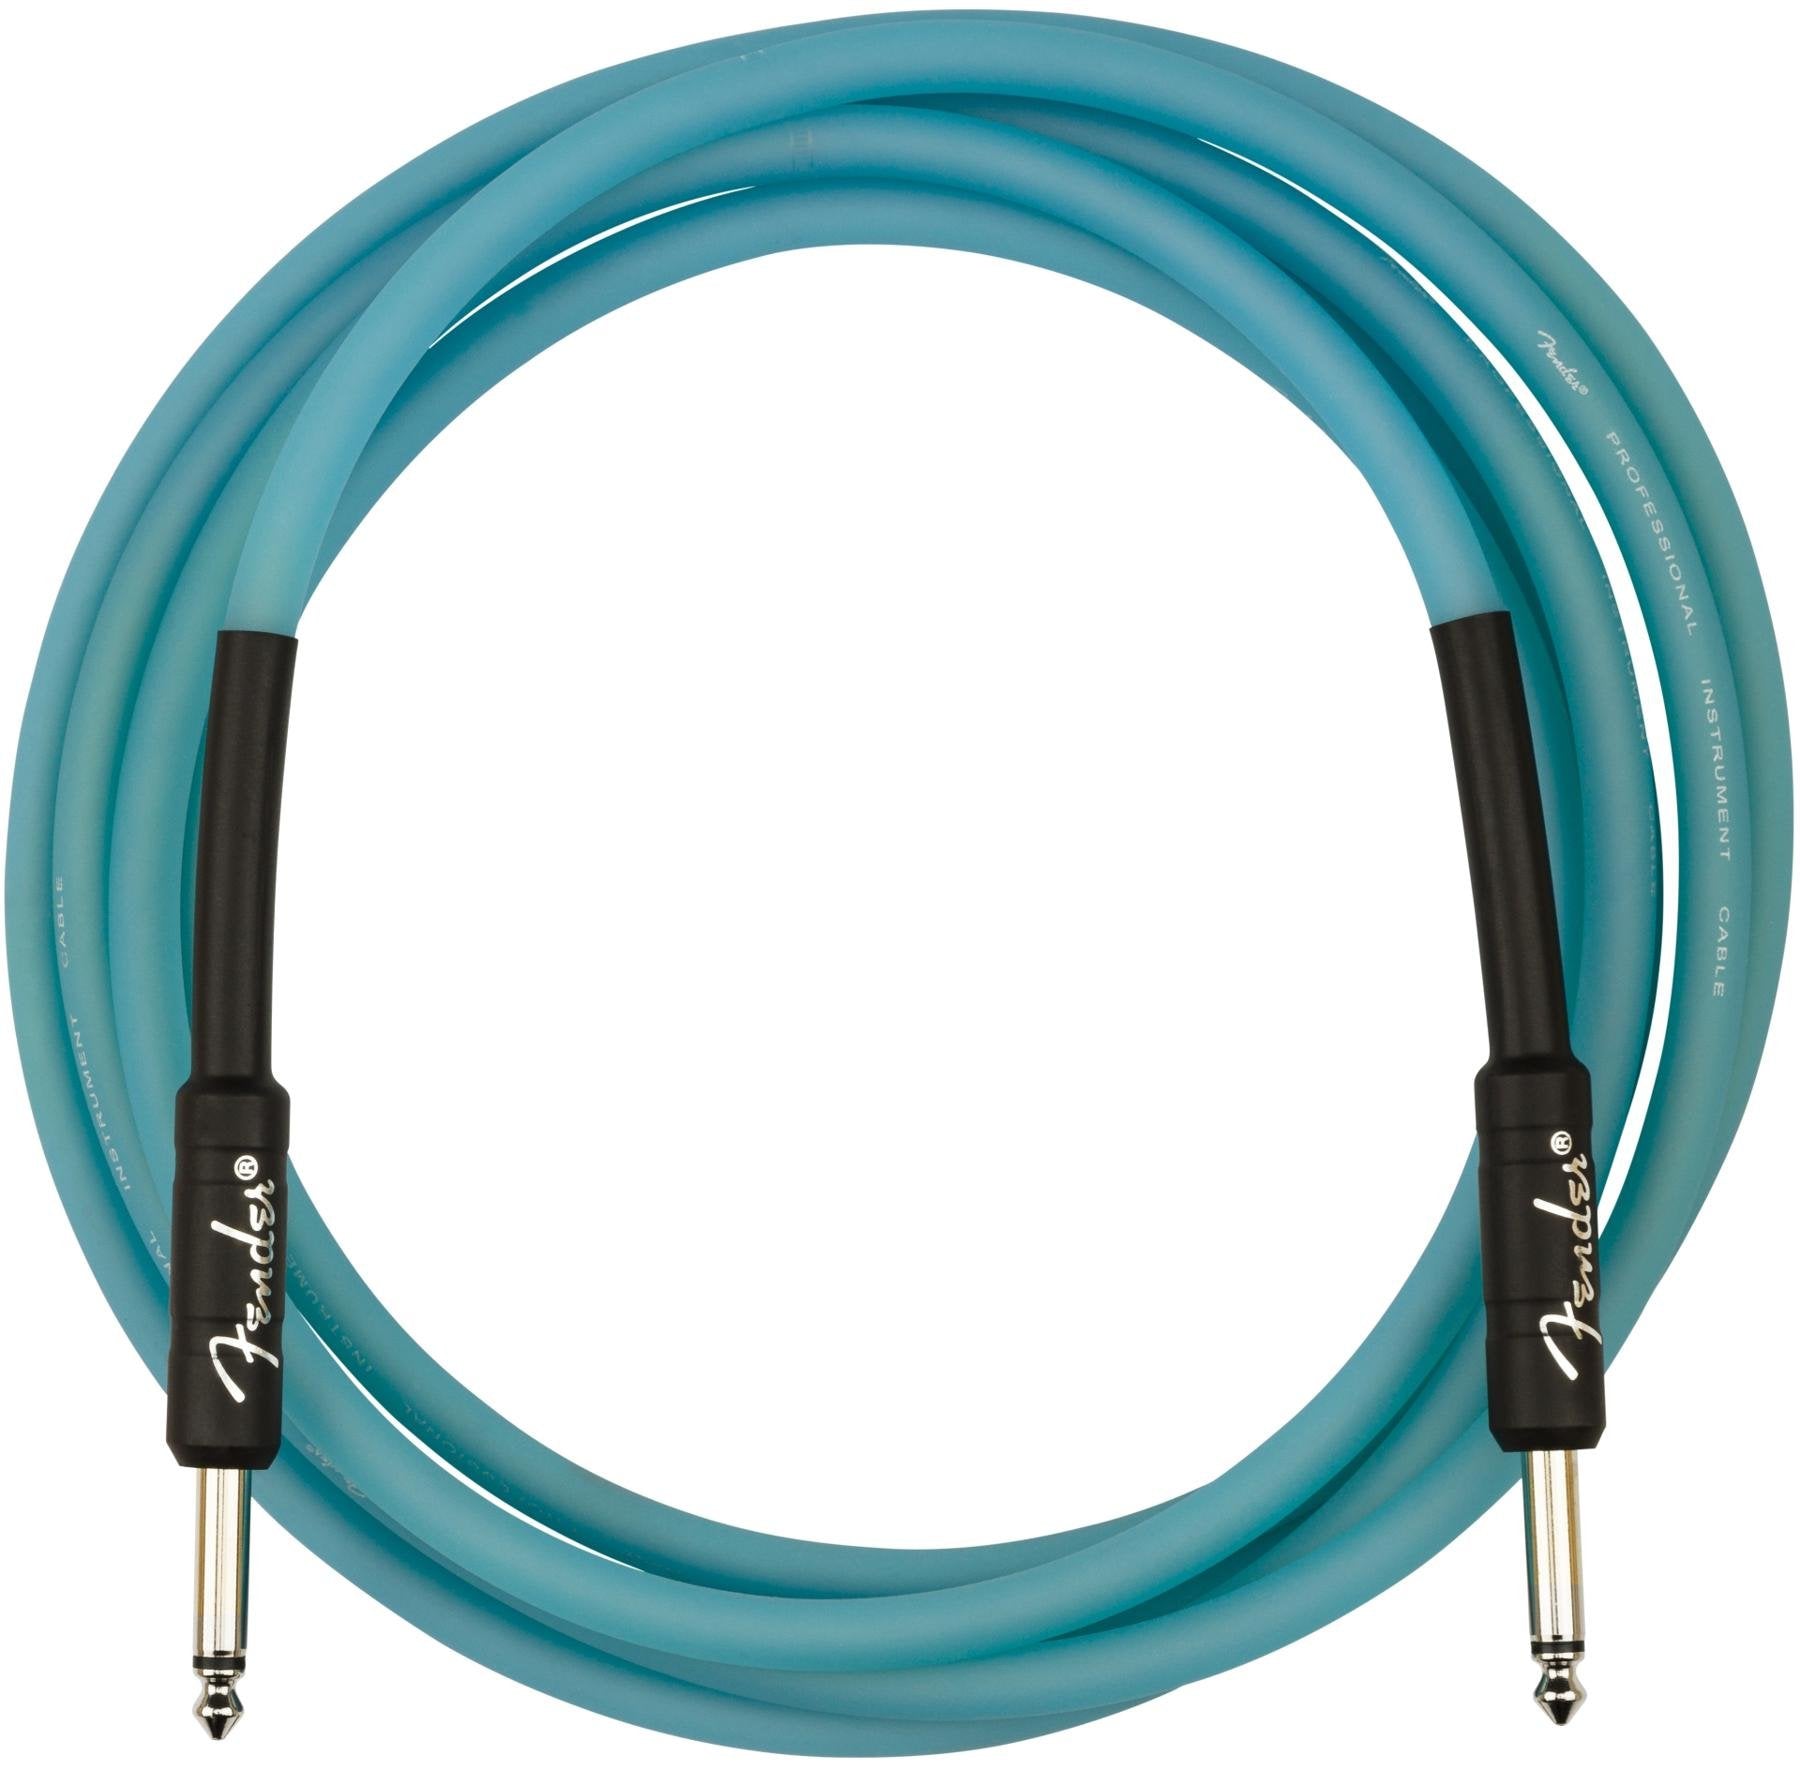 Fender Professional Series Glow in the Dark Blue Instrument Cable - 18.6ft.